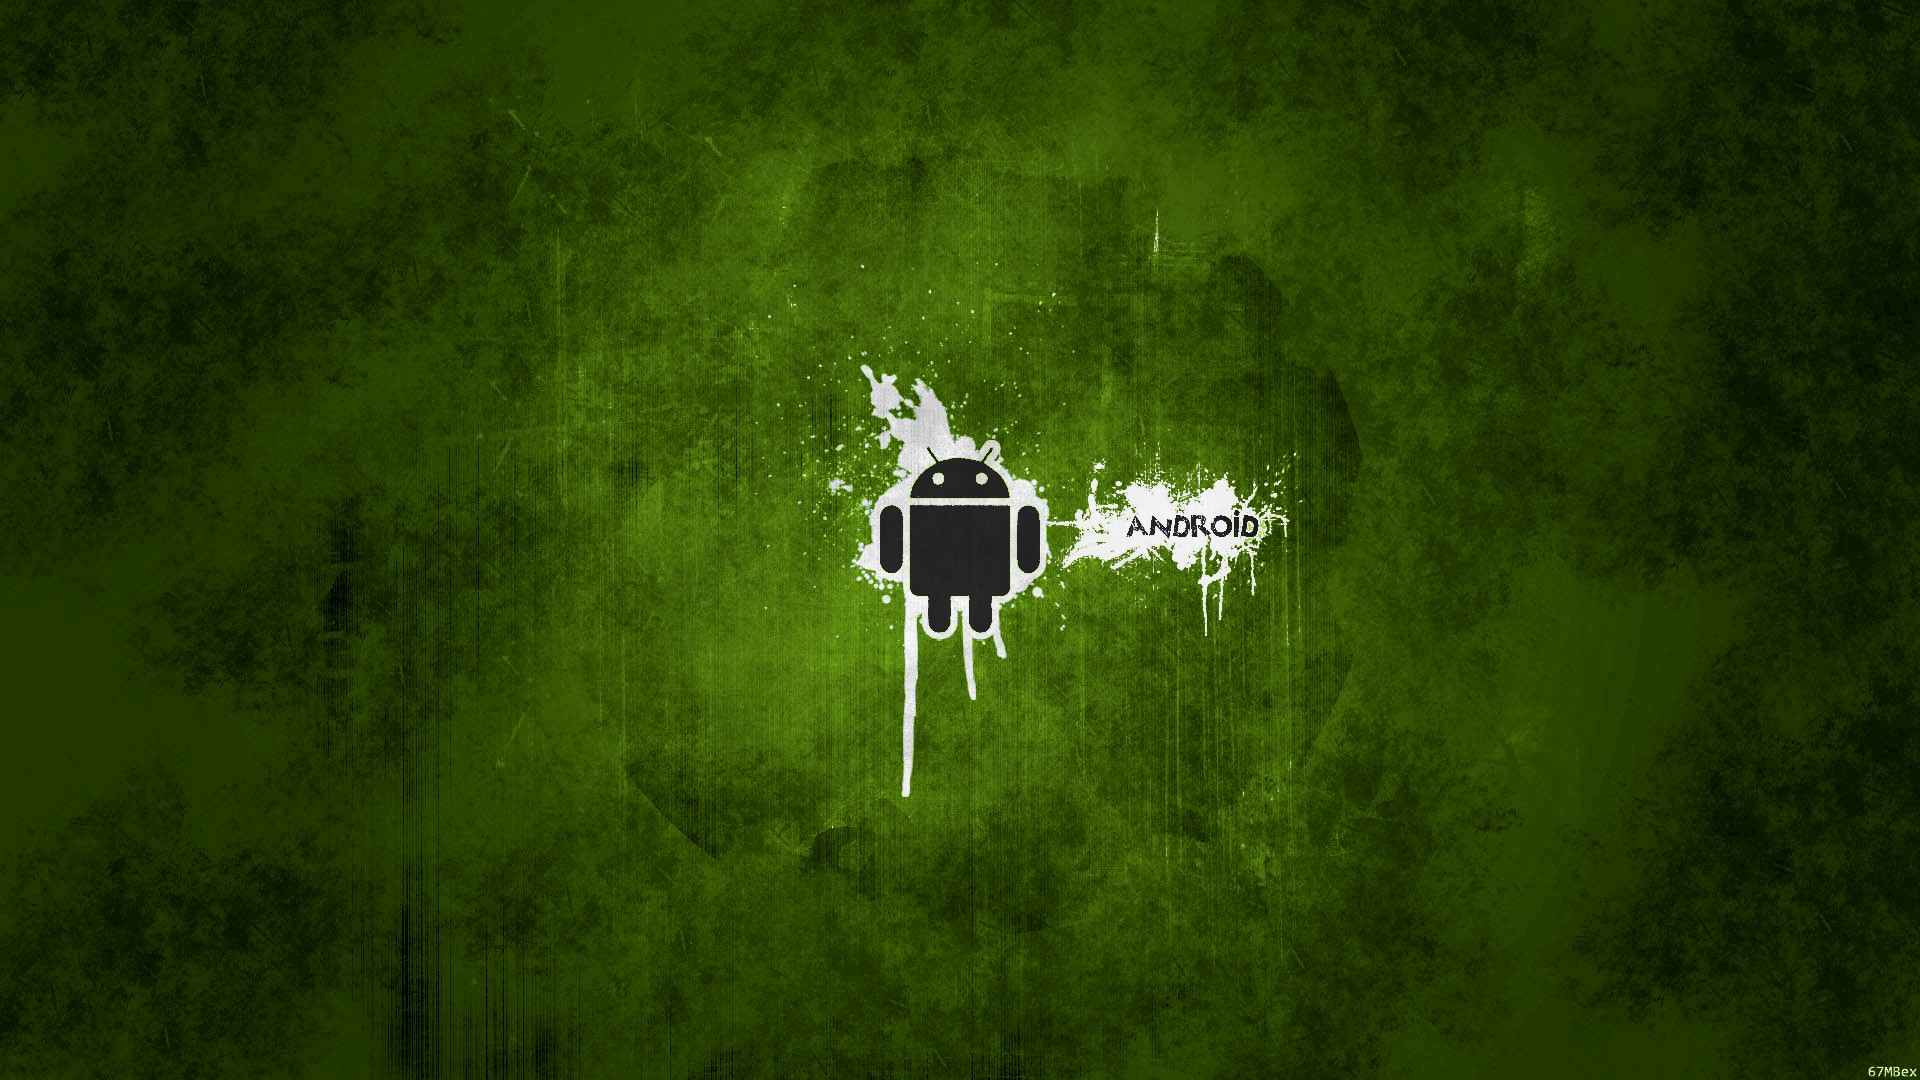 Awesome Live Wallpapers Android VD6 Wallpaper